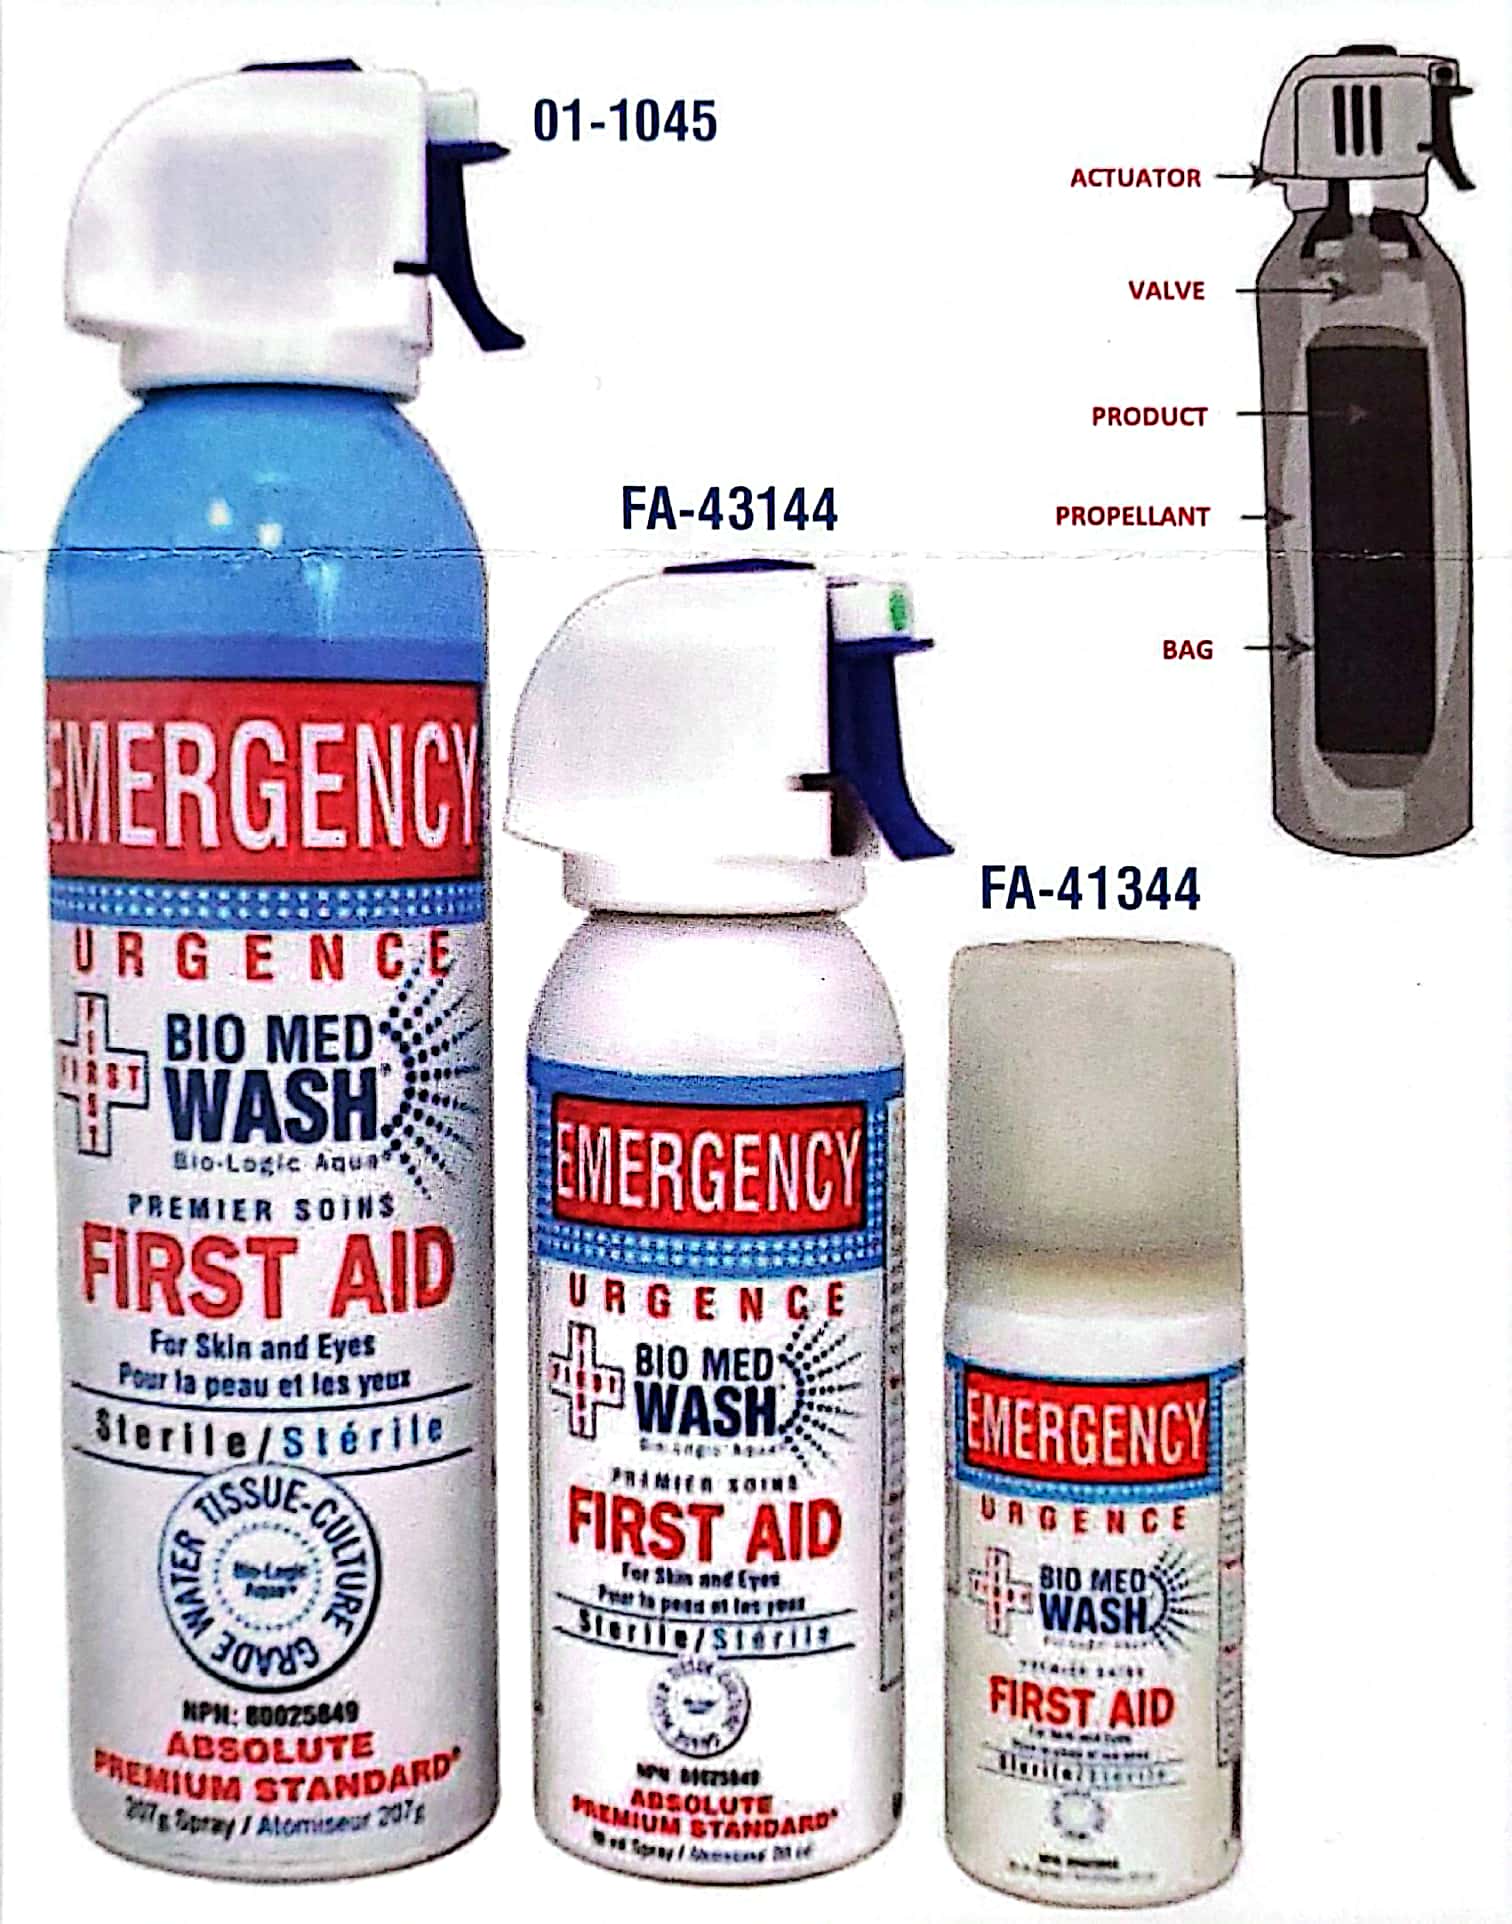 Bio Med Wash sterile first aid wash for skin and eyes.